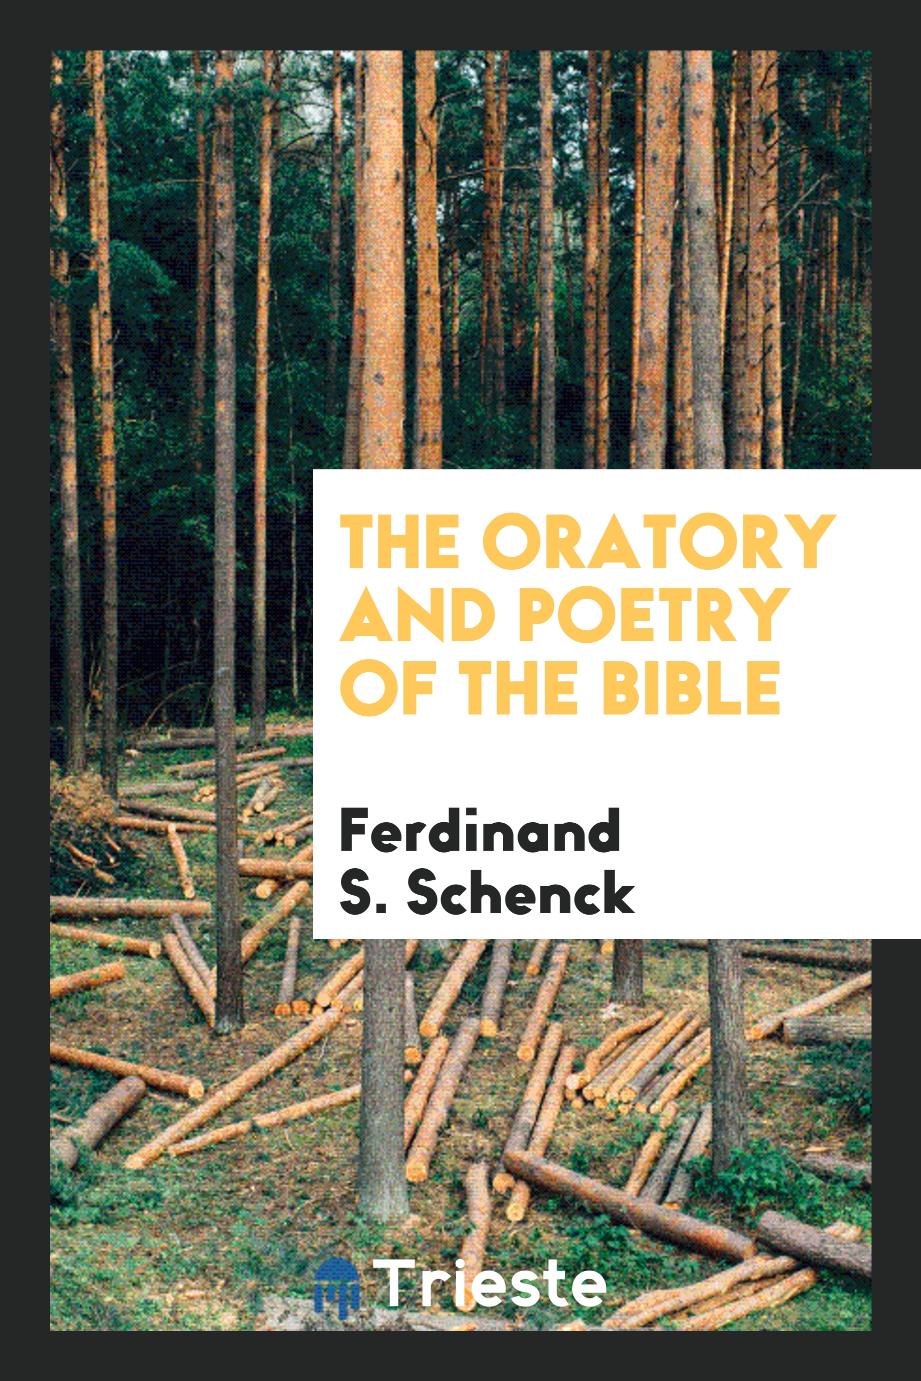 The oratory and poetry of the Bible